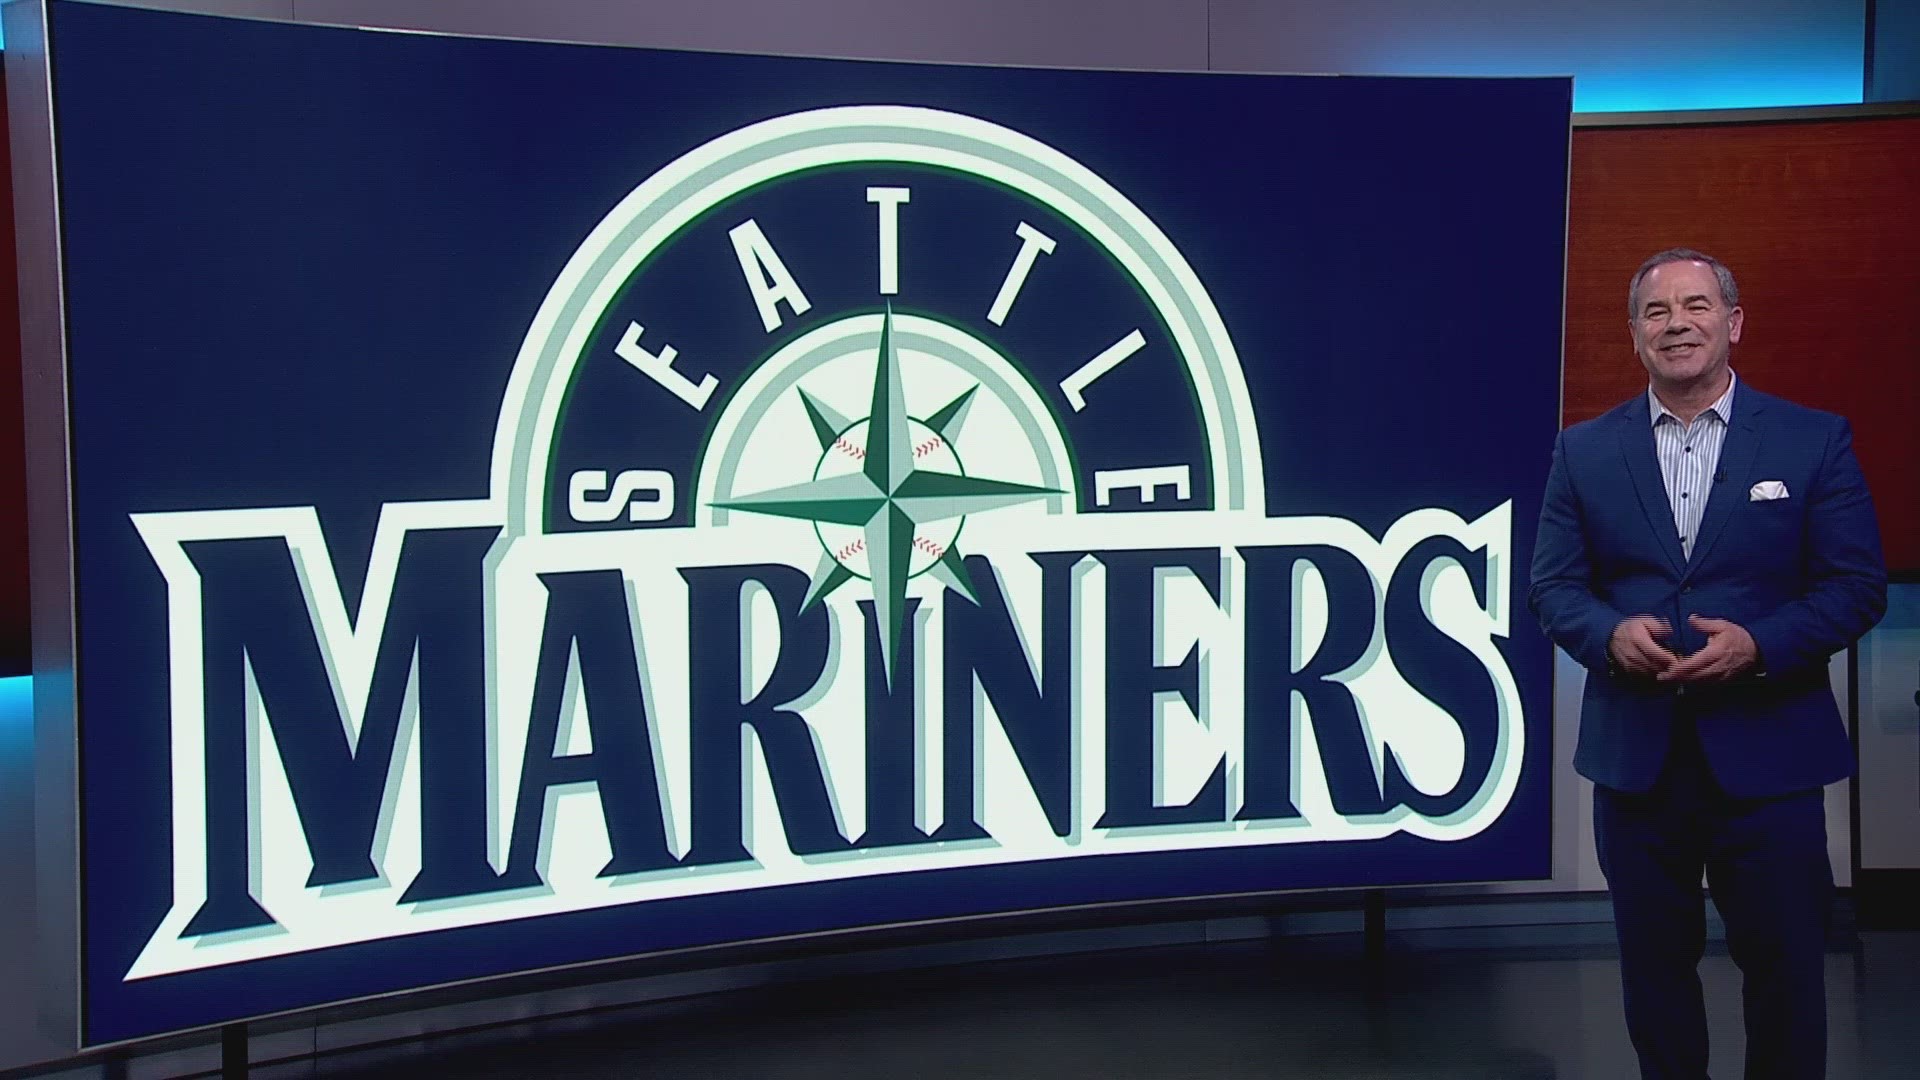 Interviews with Mariners' Jerry Dipoto and John Stanton.